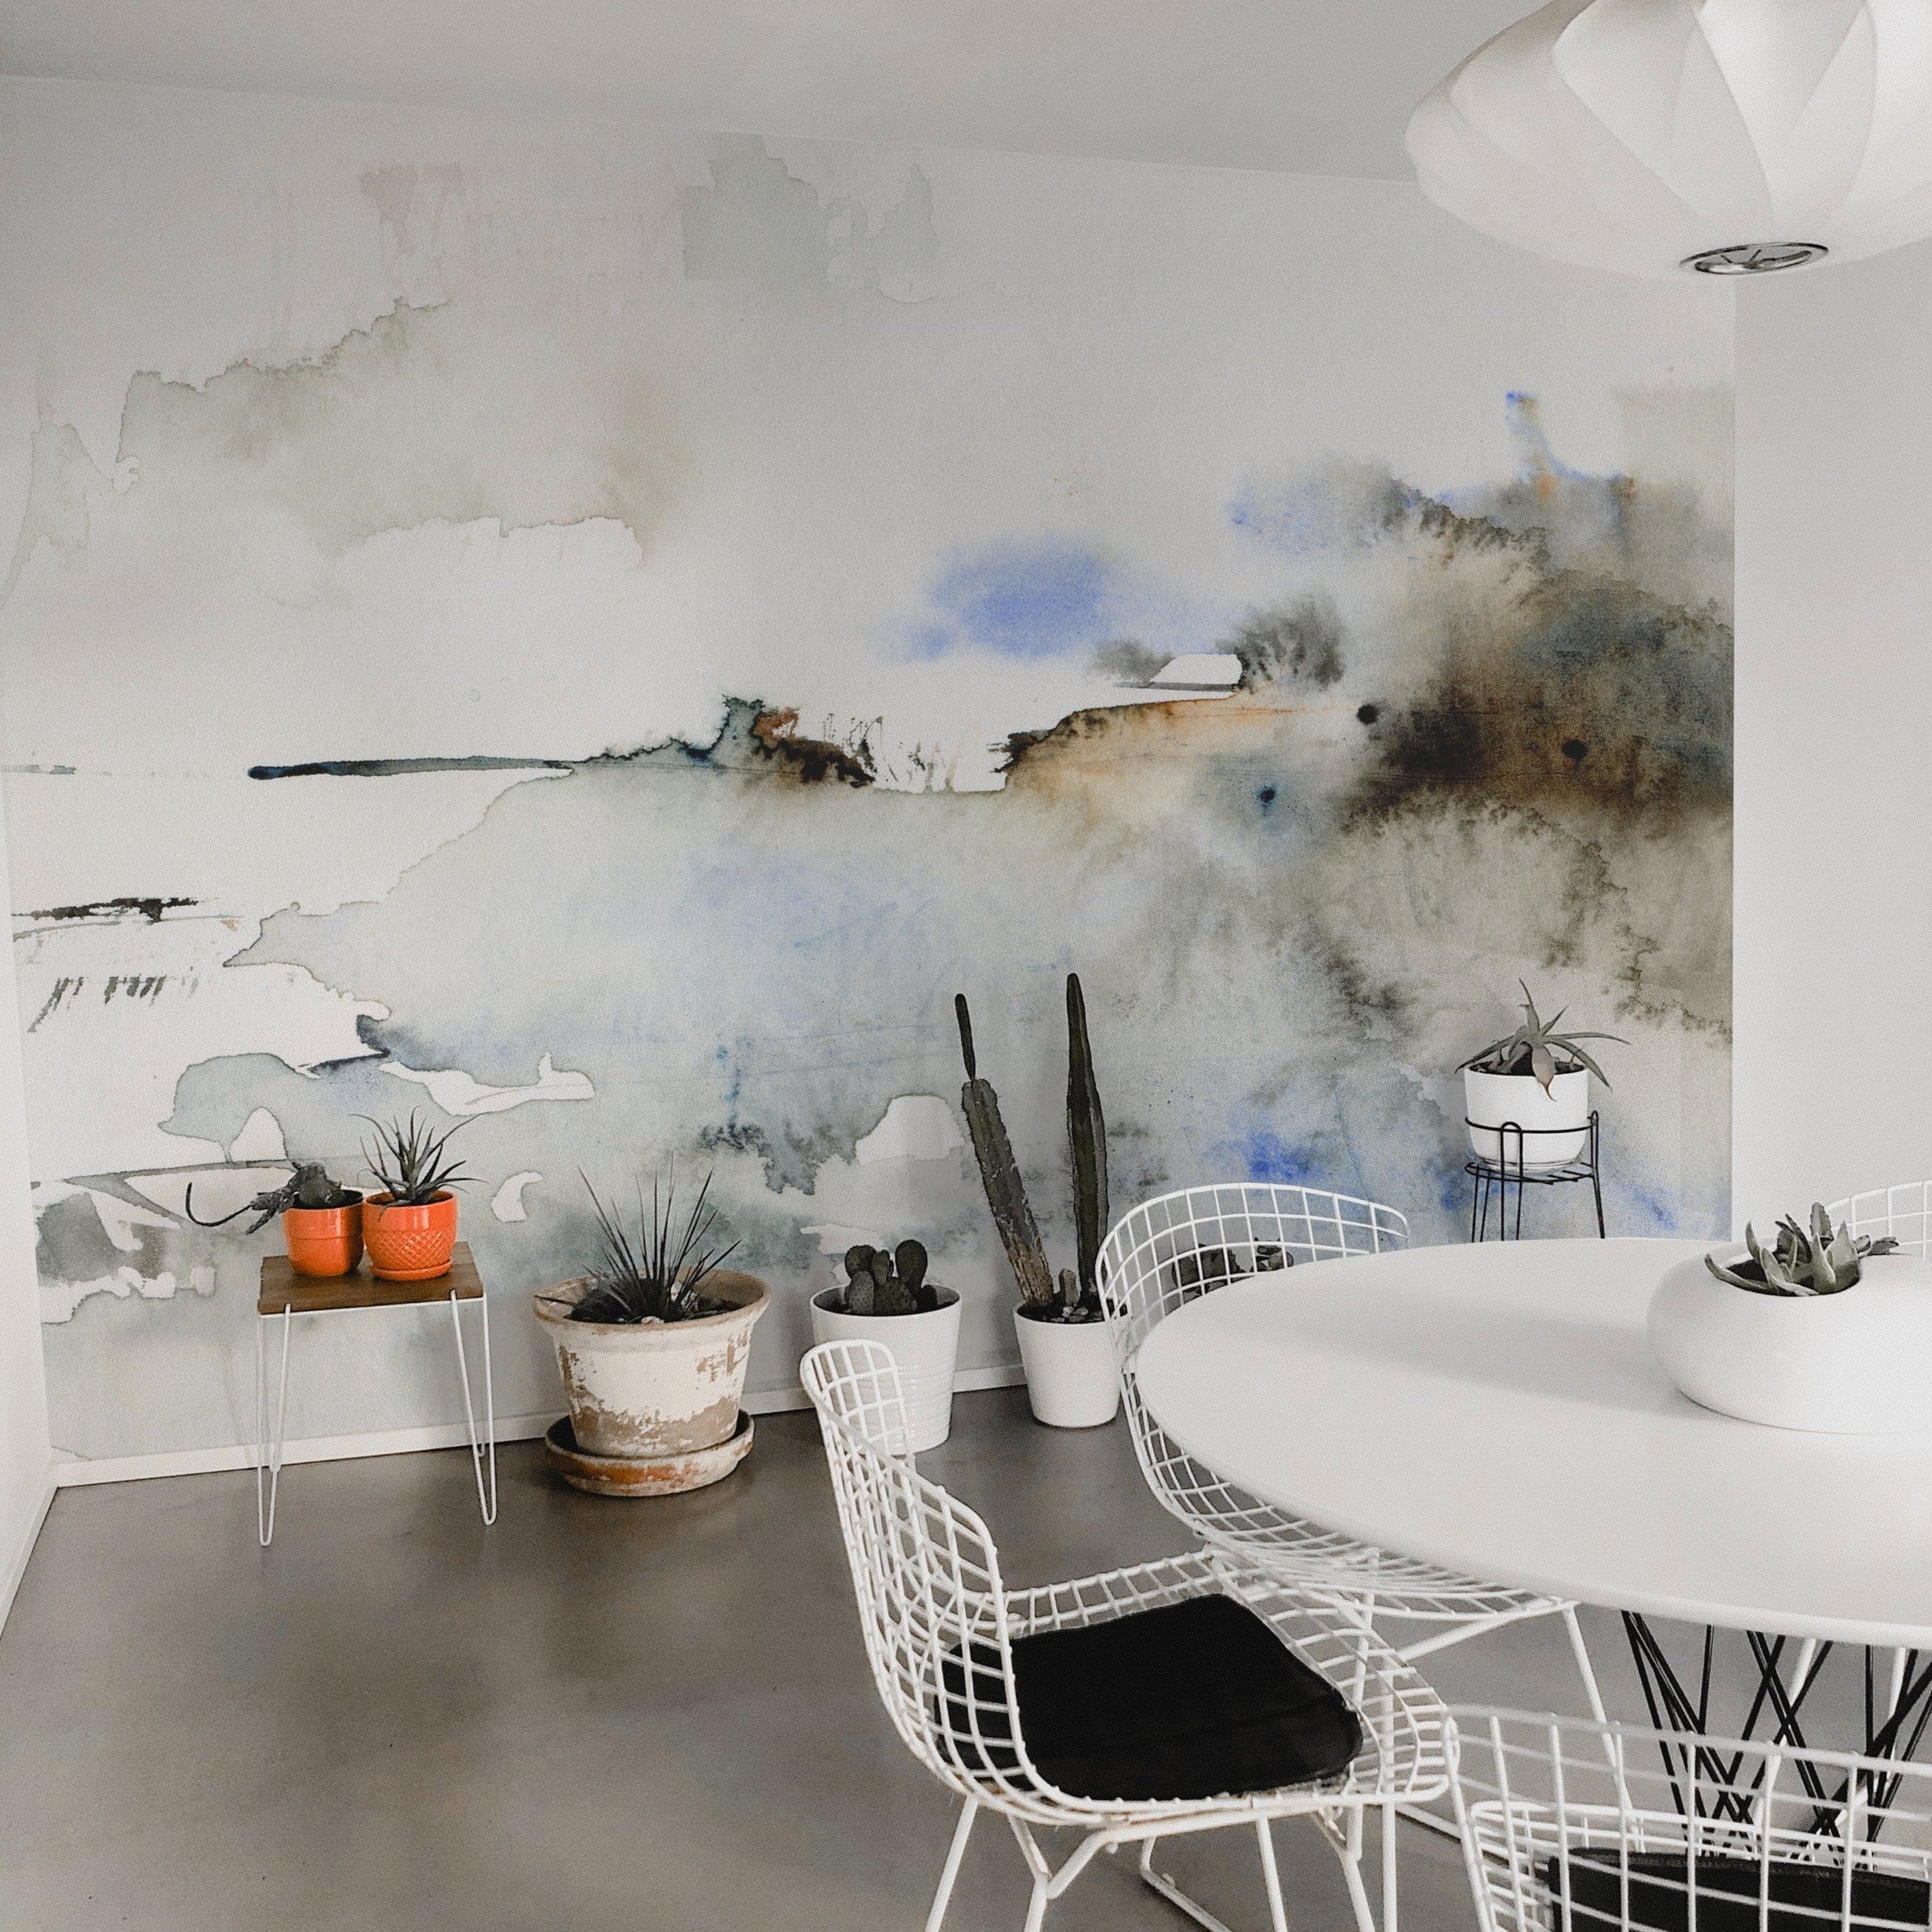  An intimate setting featuring the "Atmospheric Mural" in a cozy dining nook. The mural's abstract watercolor strokes in muted tones provide a tranquil backdrop, adding depth and character to the space while blending seamlessly with modern furniture and natural light.